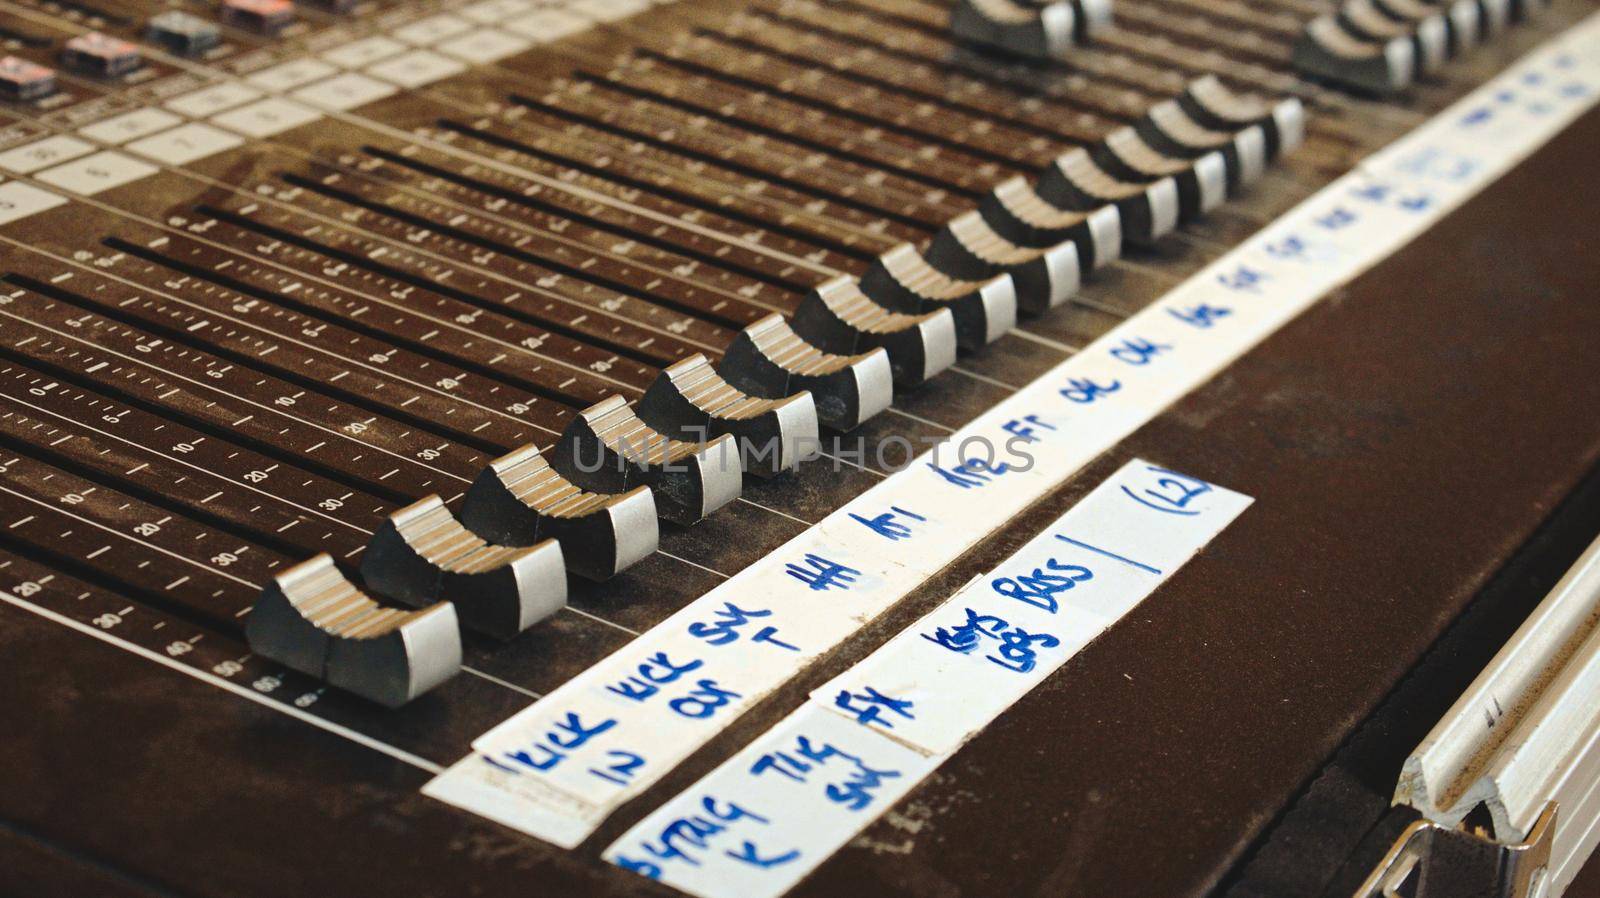 Audio mixing desk for sound channels for a live band concert at a festival